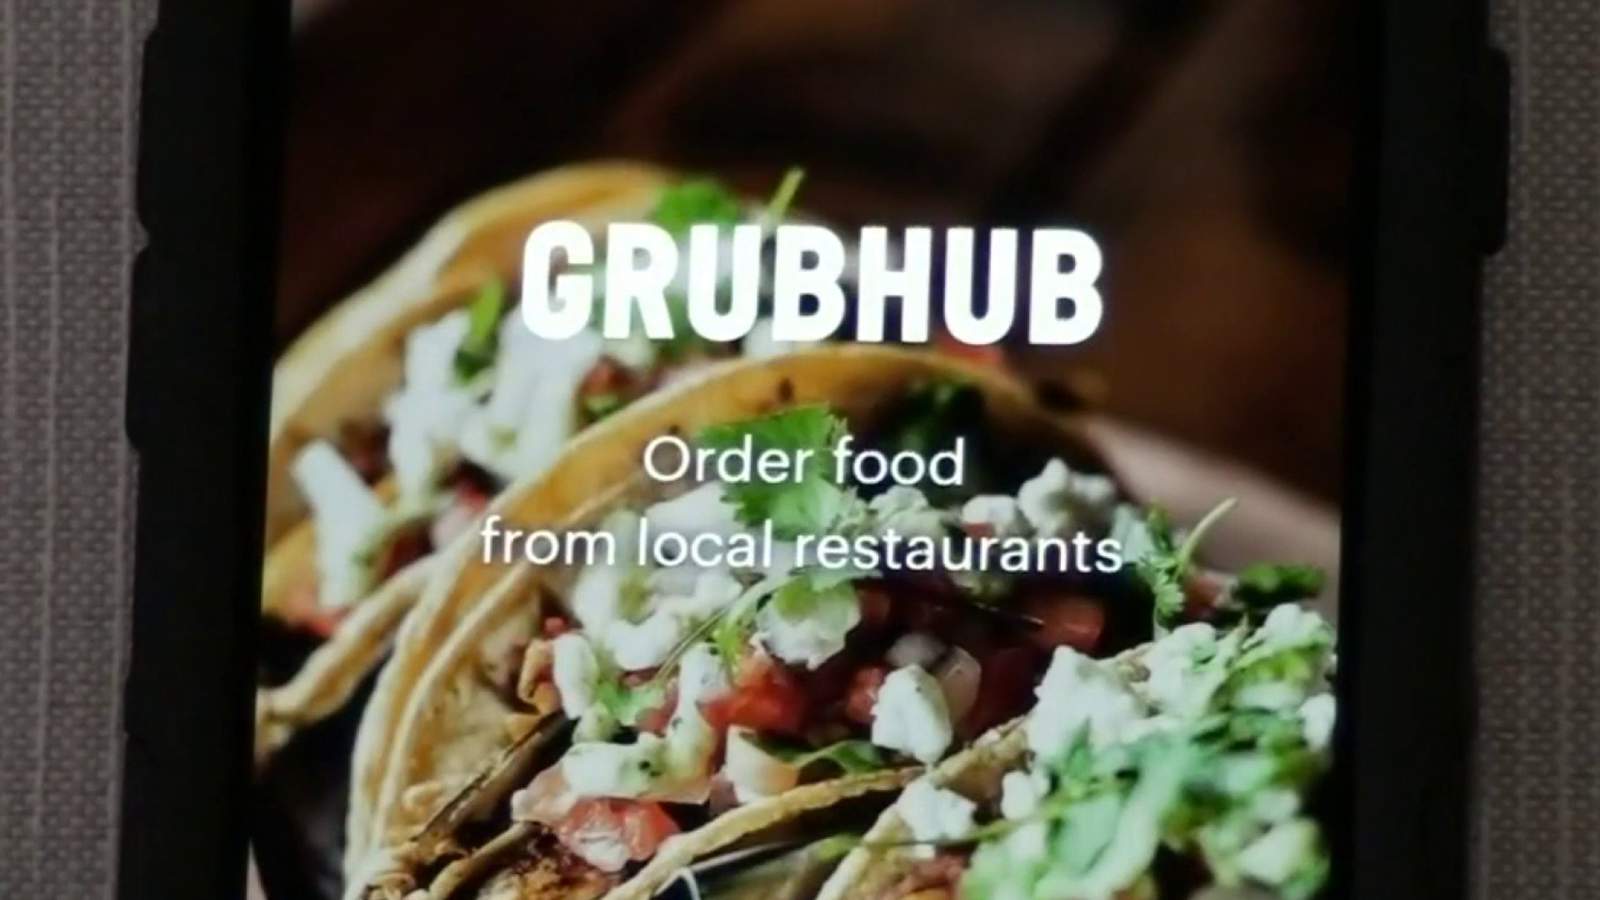 Some restaurants say Grubhub is selling their food without permission